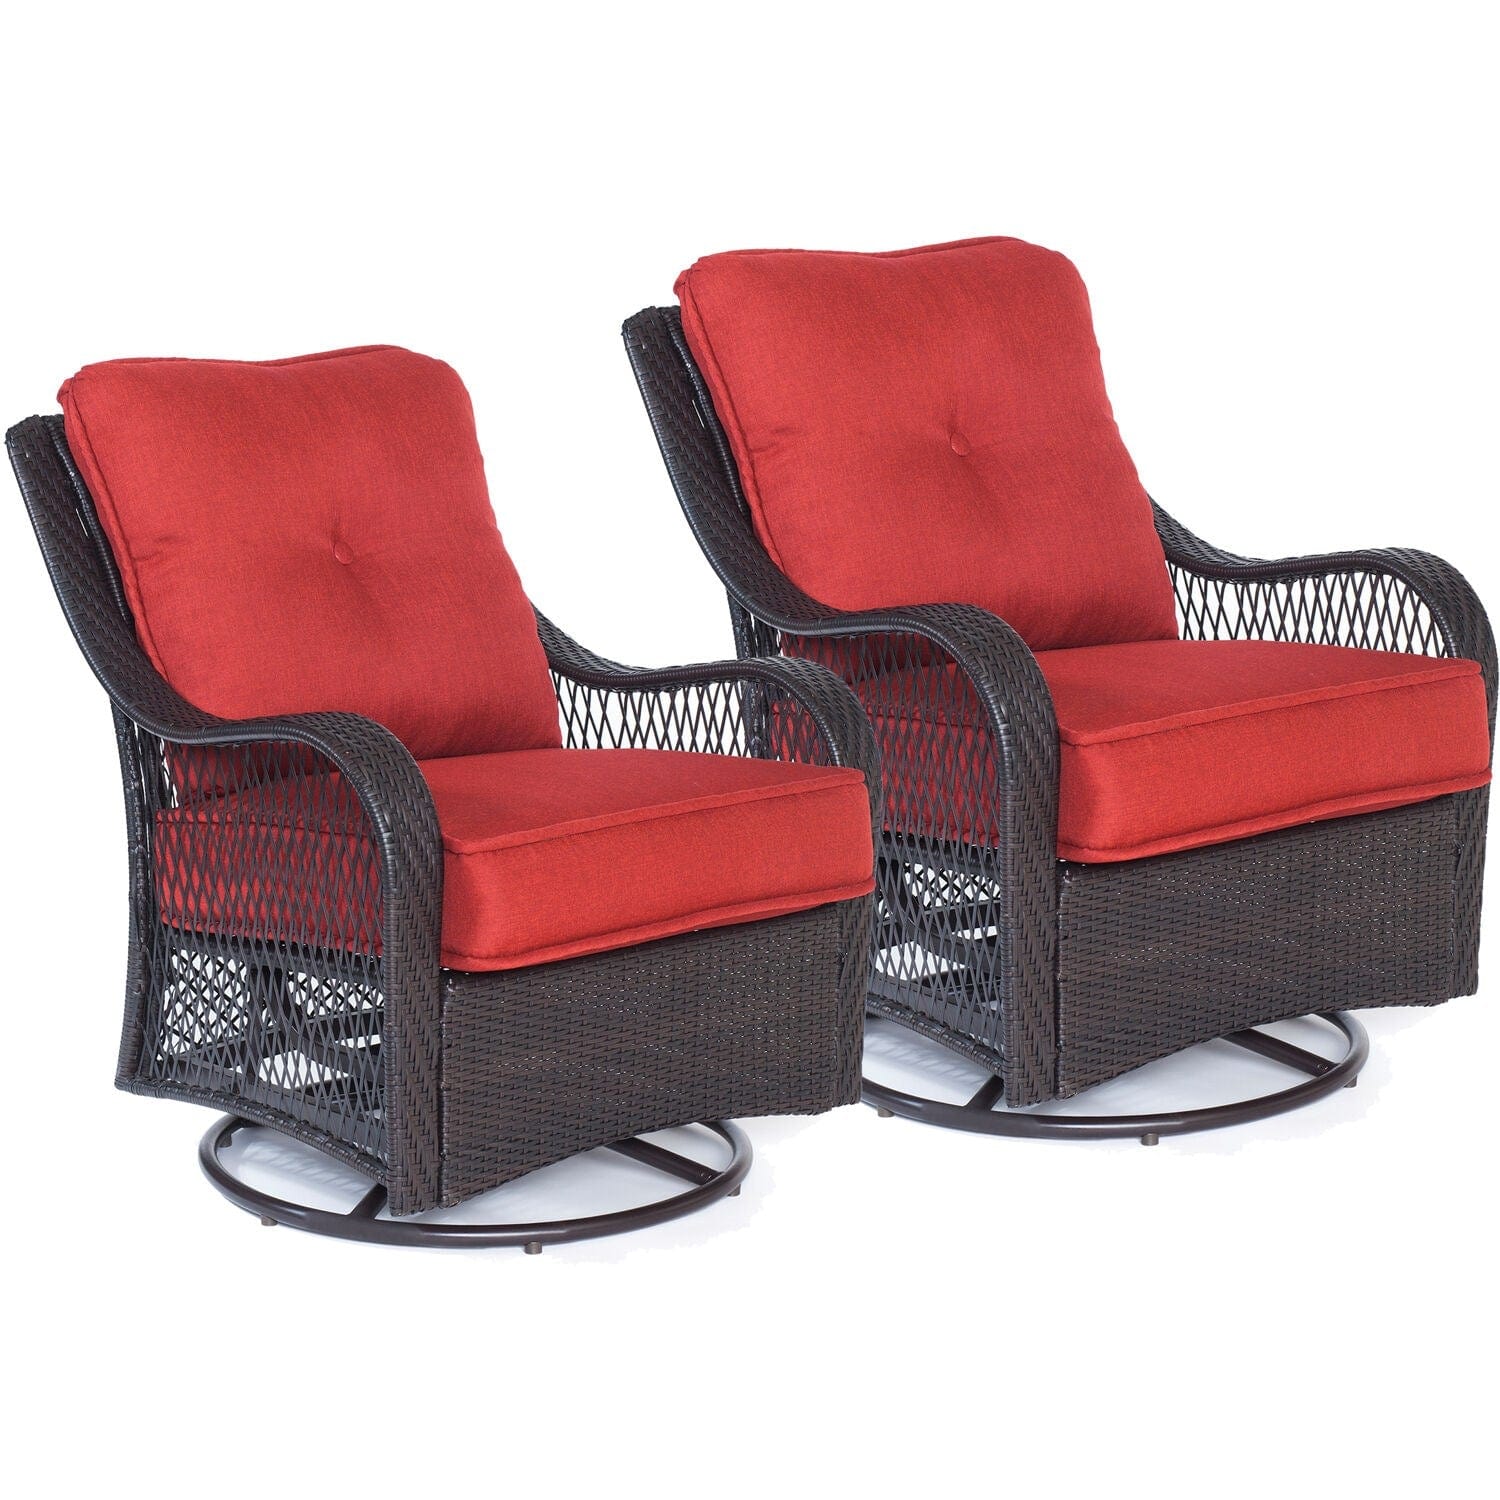 Hanover Fire Pit Chat Set Hanover Orleans 5-Piece Wicker Fire Pit Chat Set with a 40,000 BTU Fire Pit Table and 4 Woven Swivel Gliders in Autumn Berry| Red  | ORL5PCCFPSW4-BRY